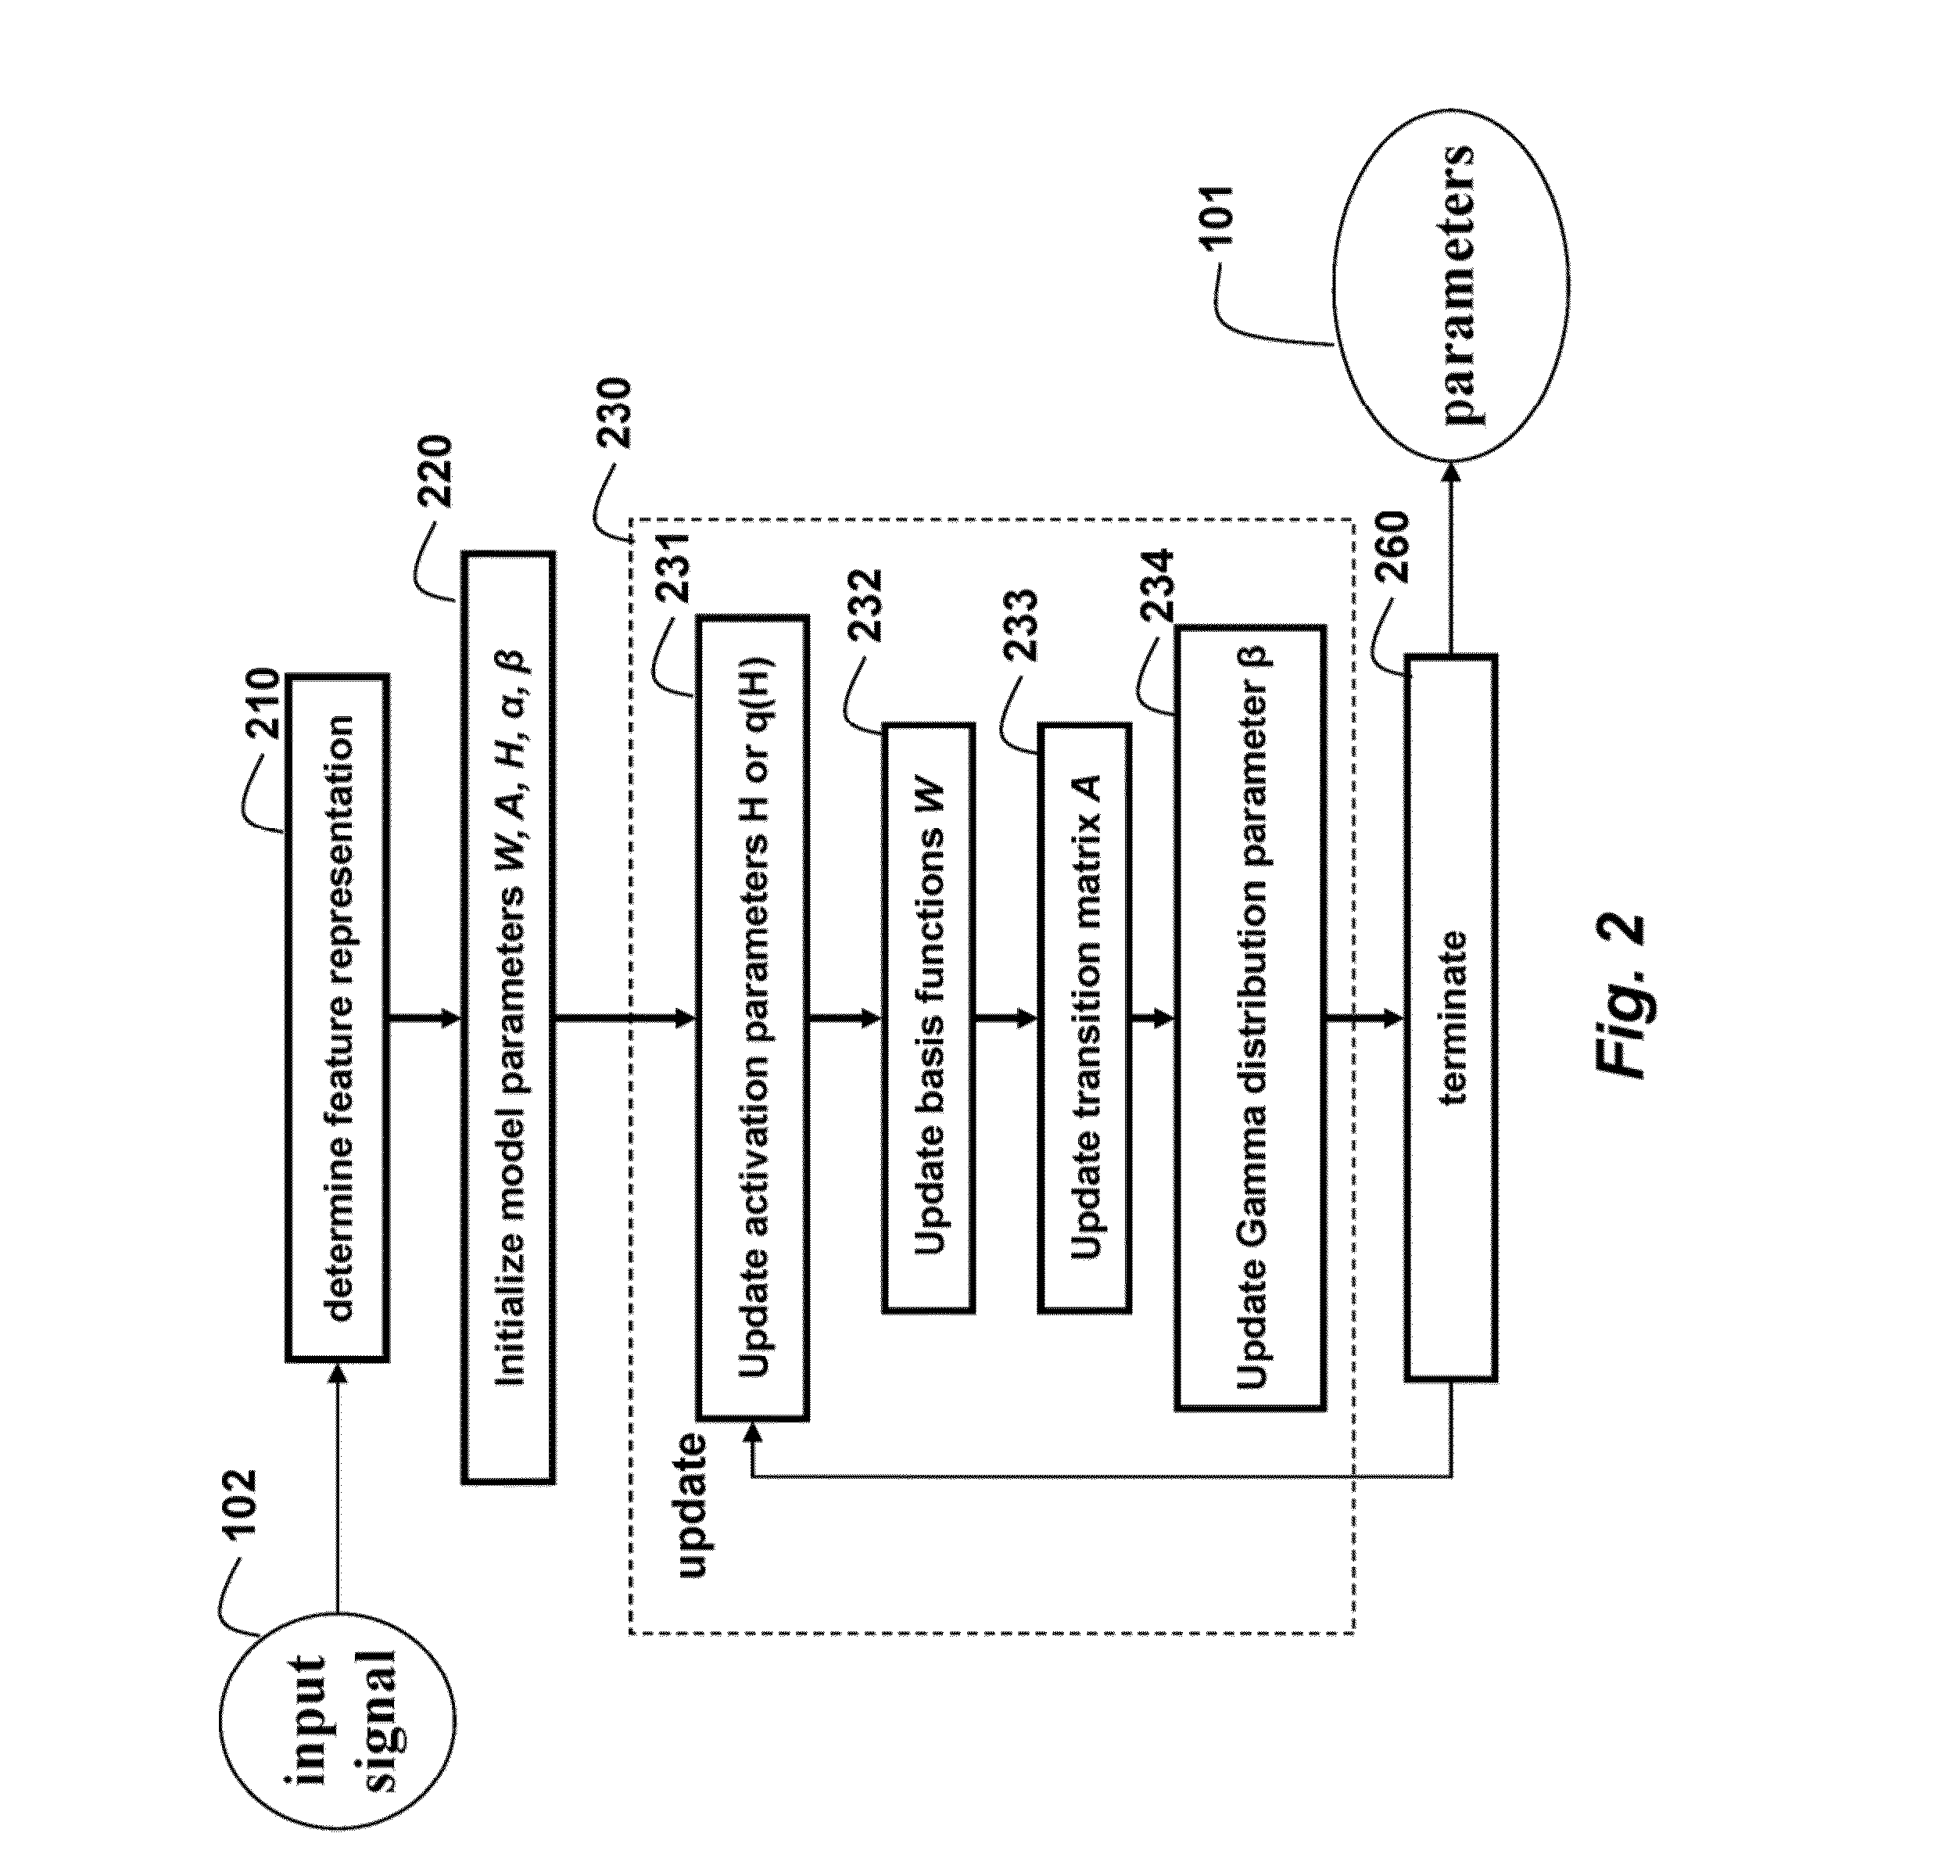 Method for Transforming Non-Stationary Signals Using a Dynamic Model